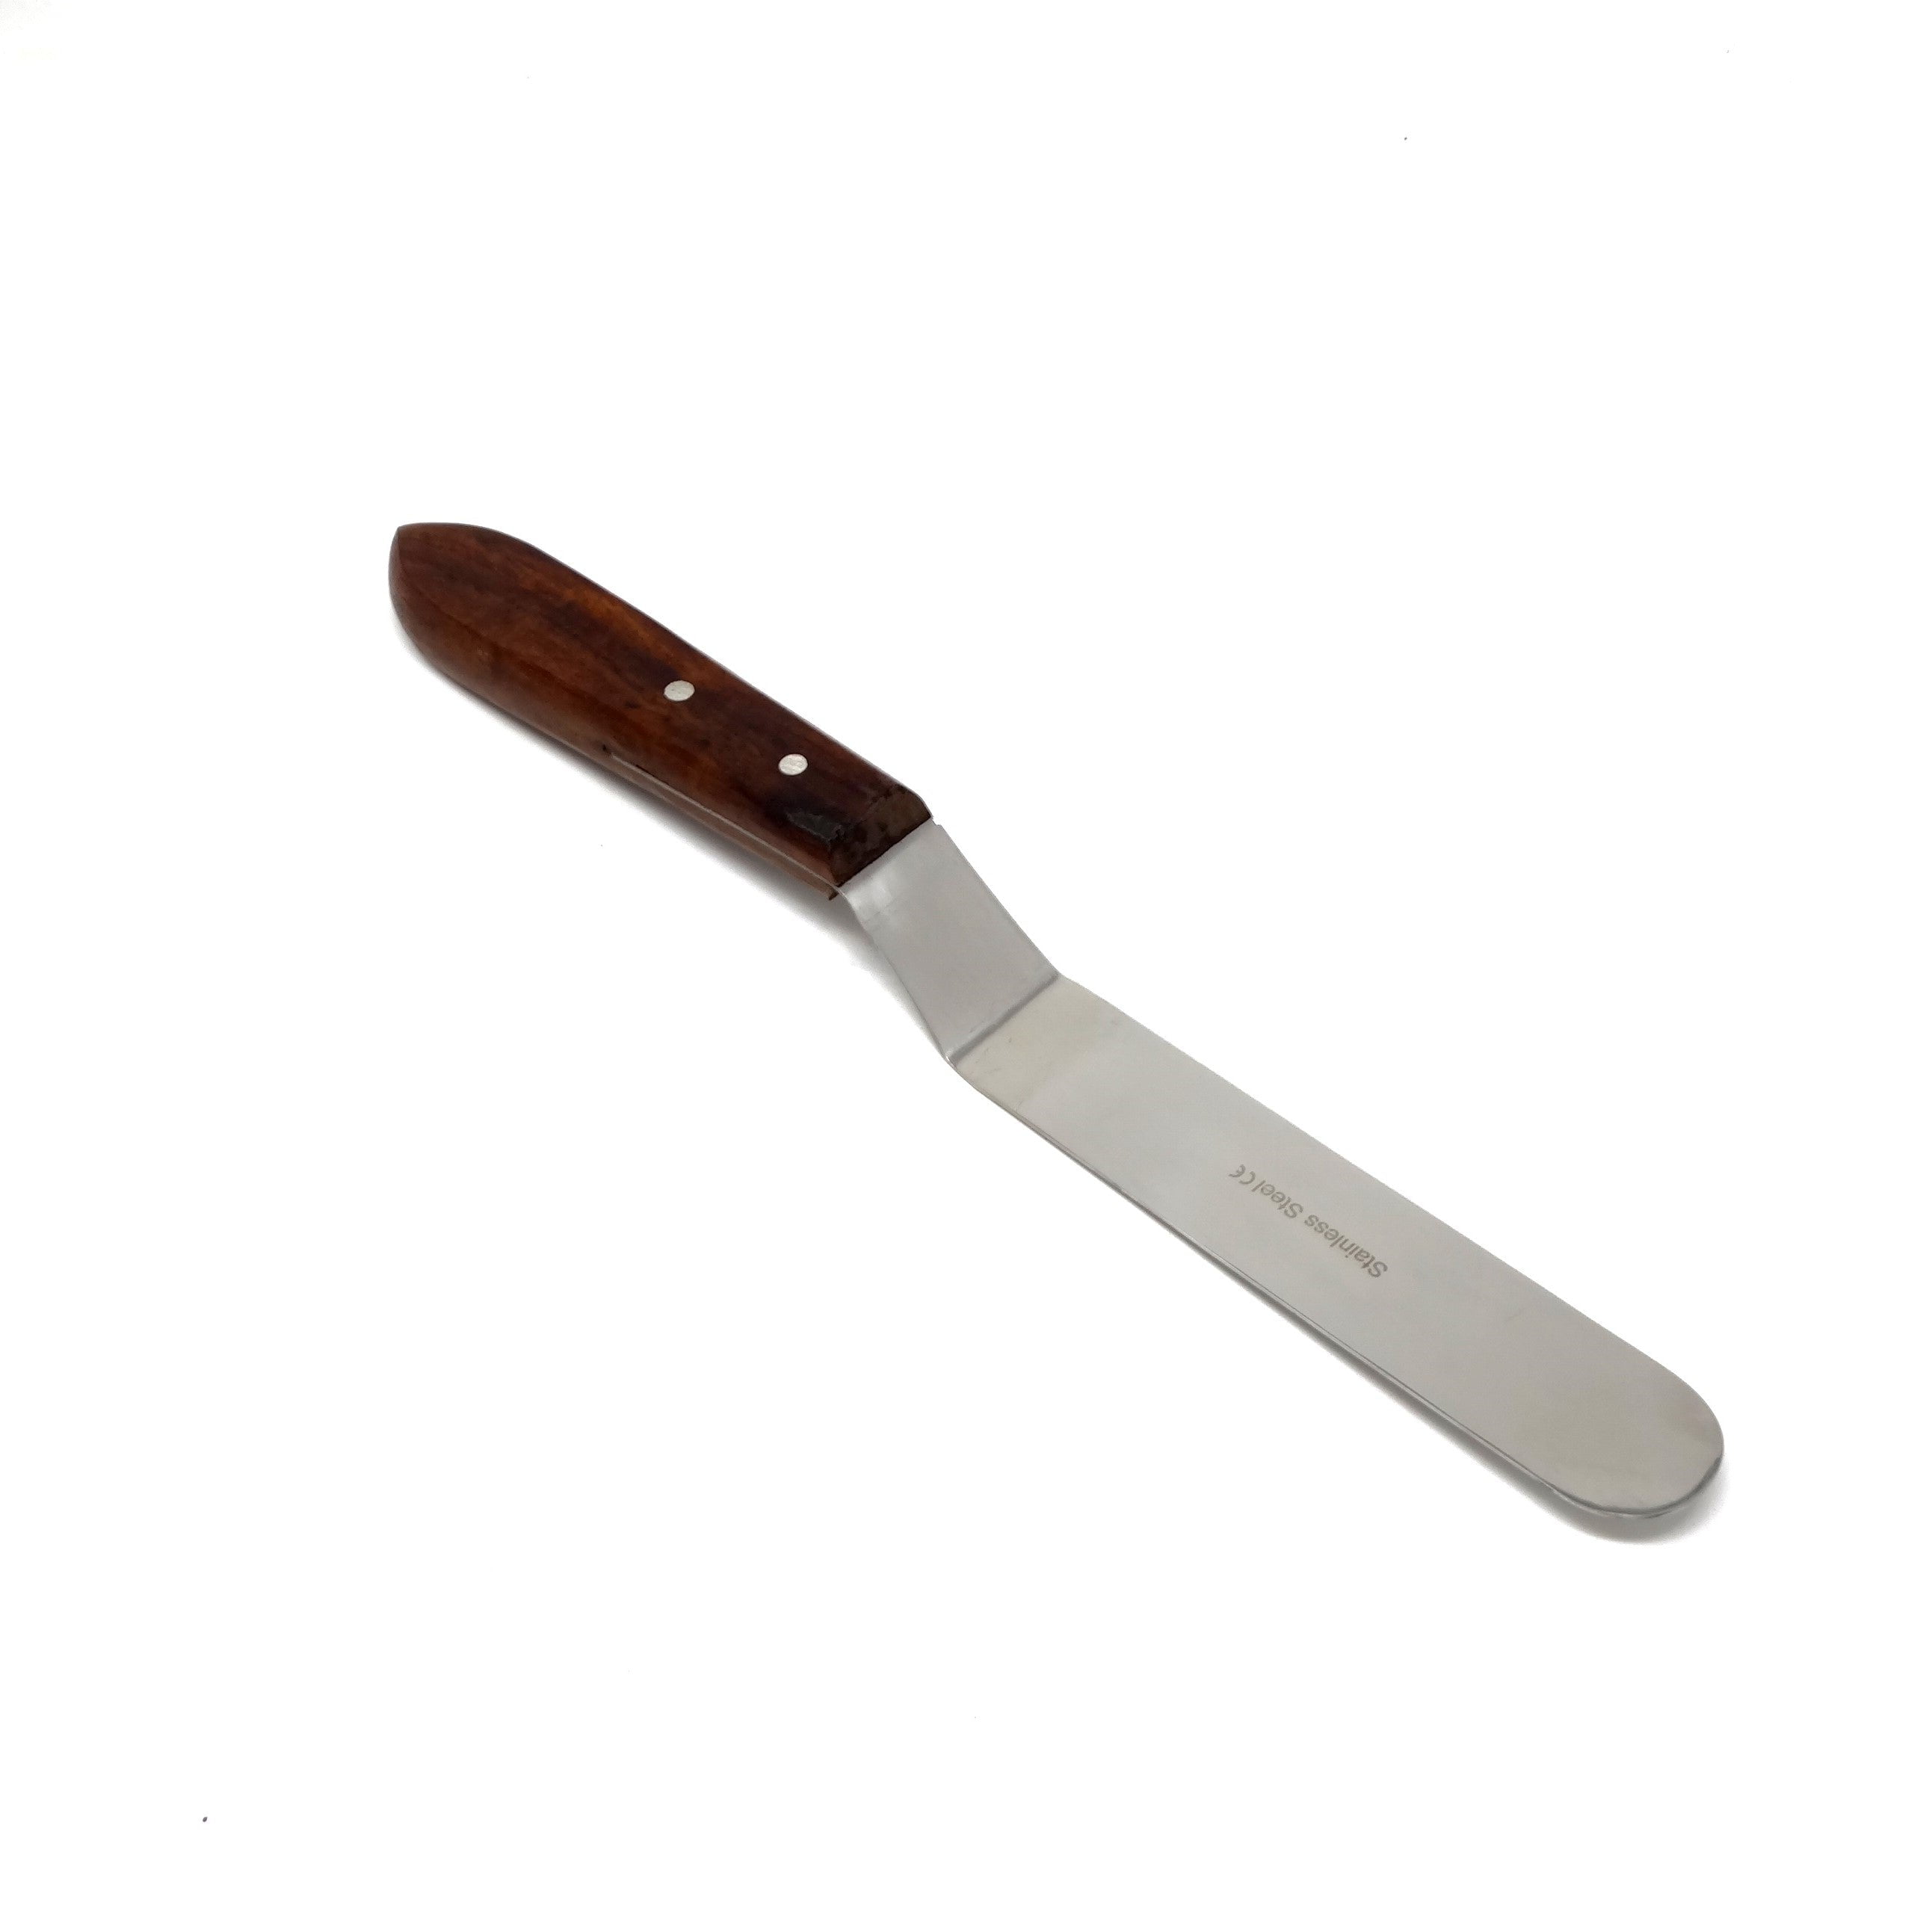 TG227A Large Offset Spatula by Taste of Home